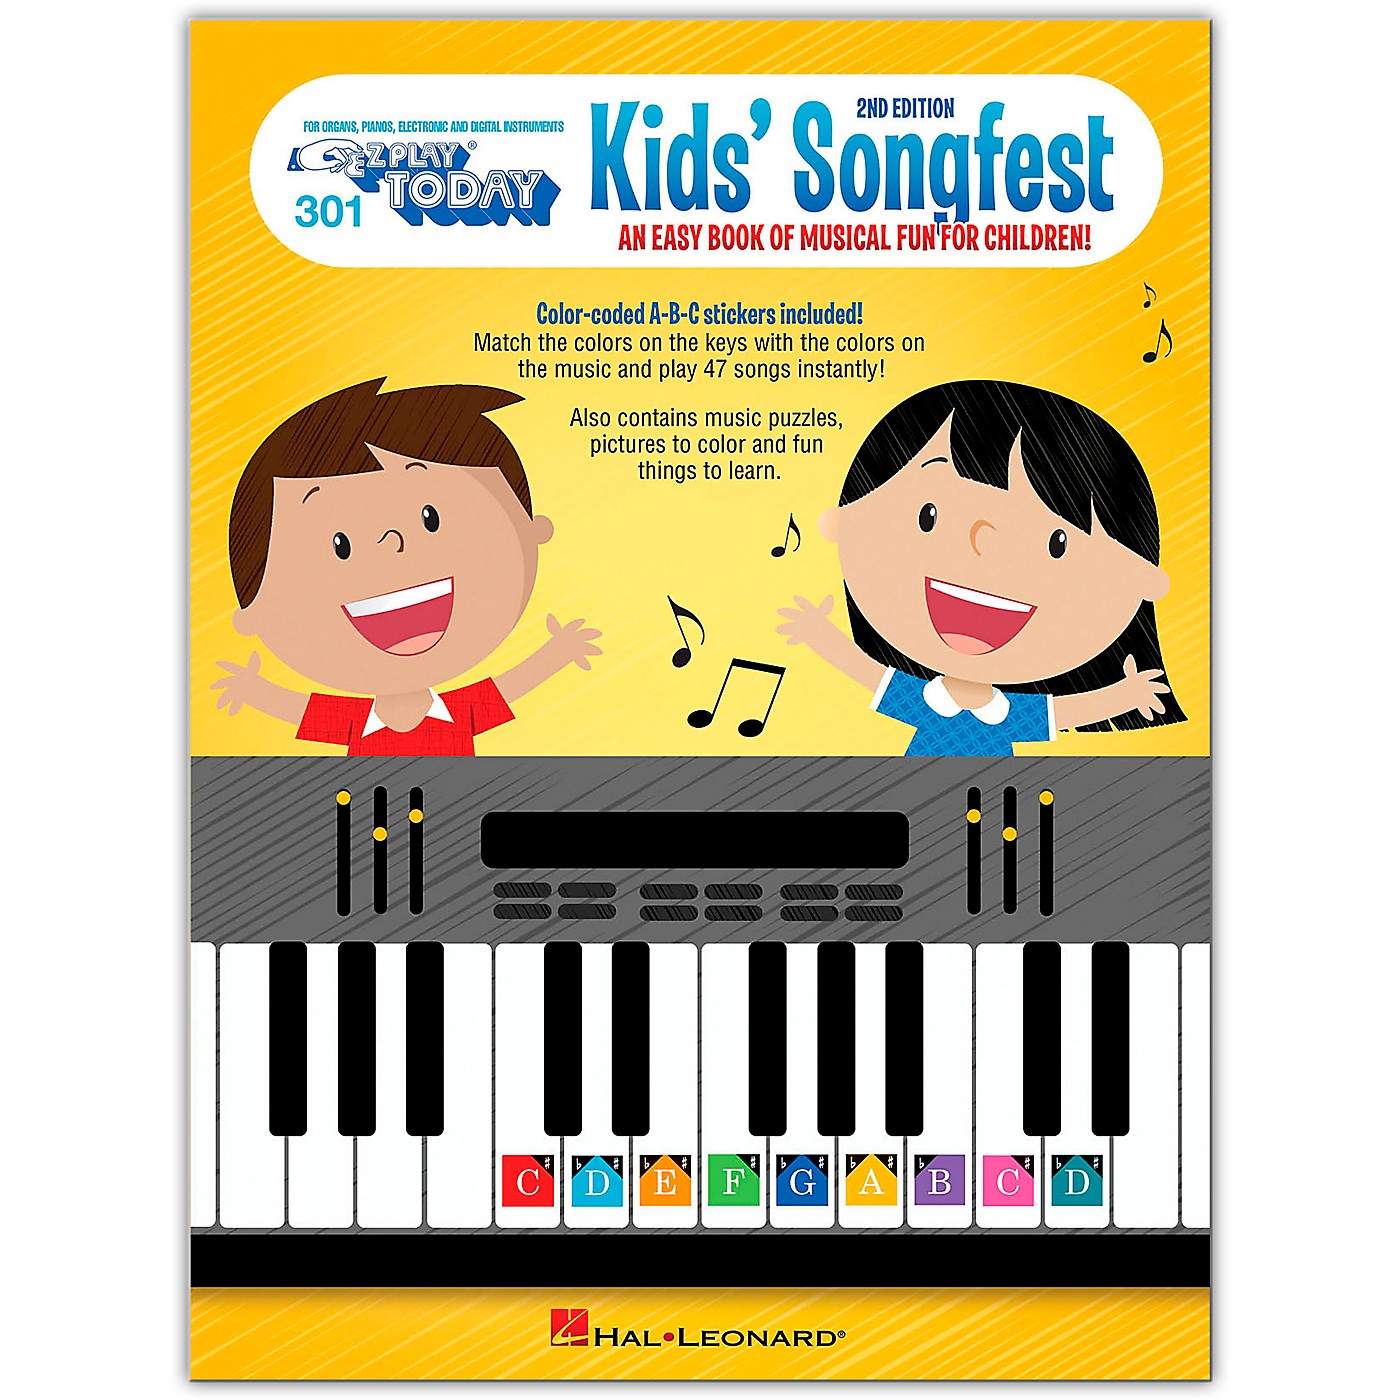 Hal Leonard Kid's Songfest - 2nd Edition E-Z Play Today Volume 301 thumbnail